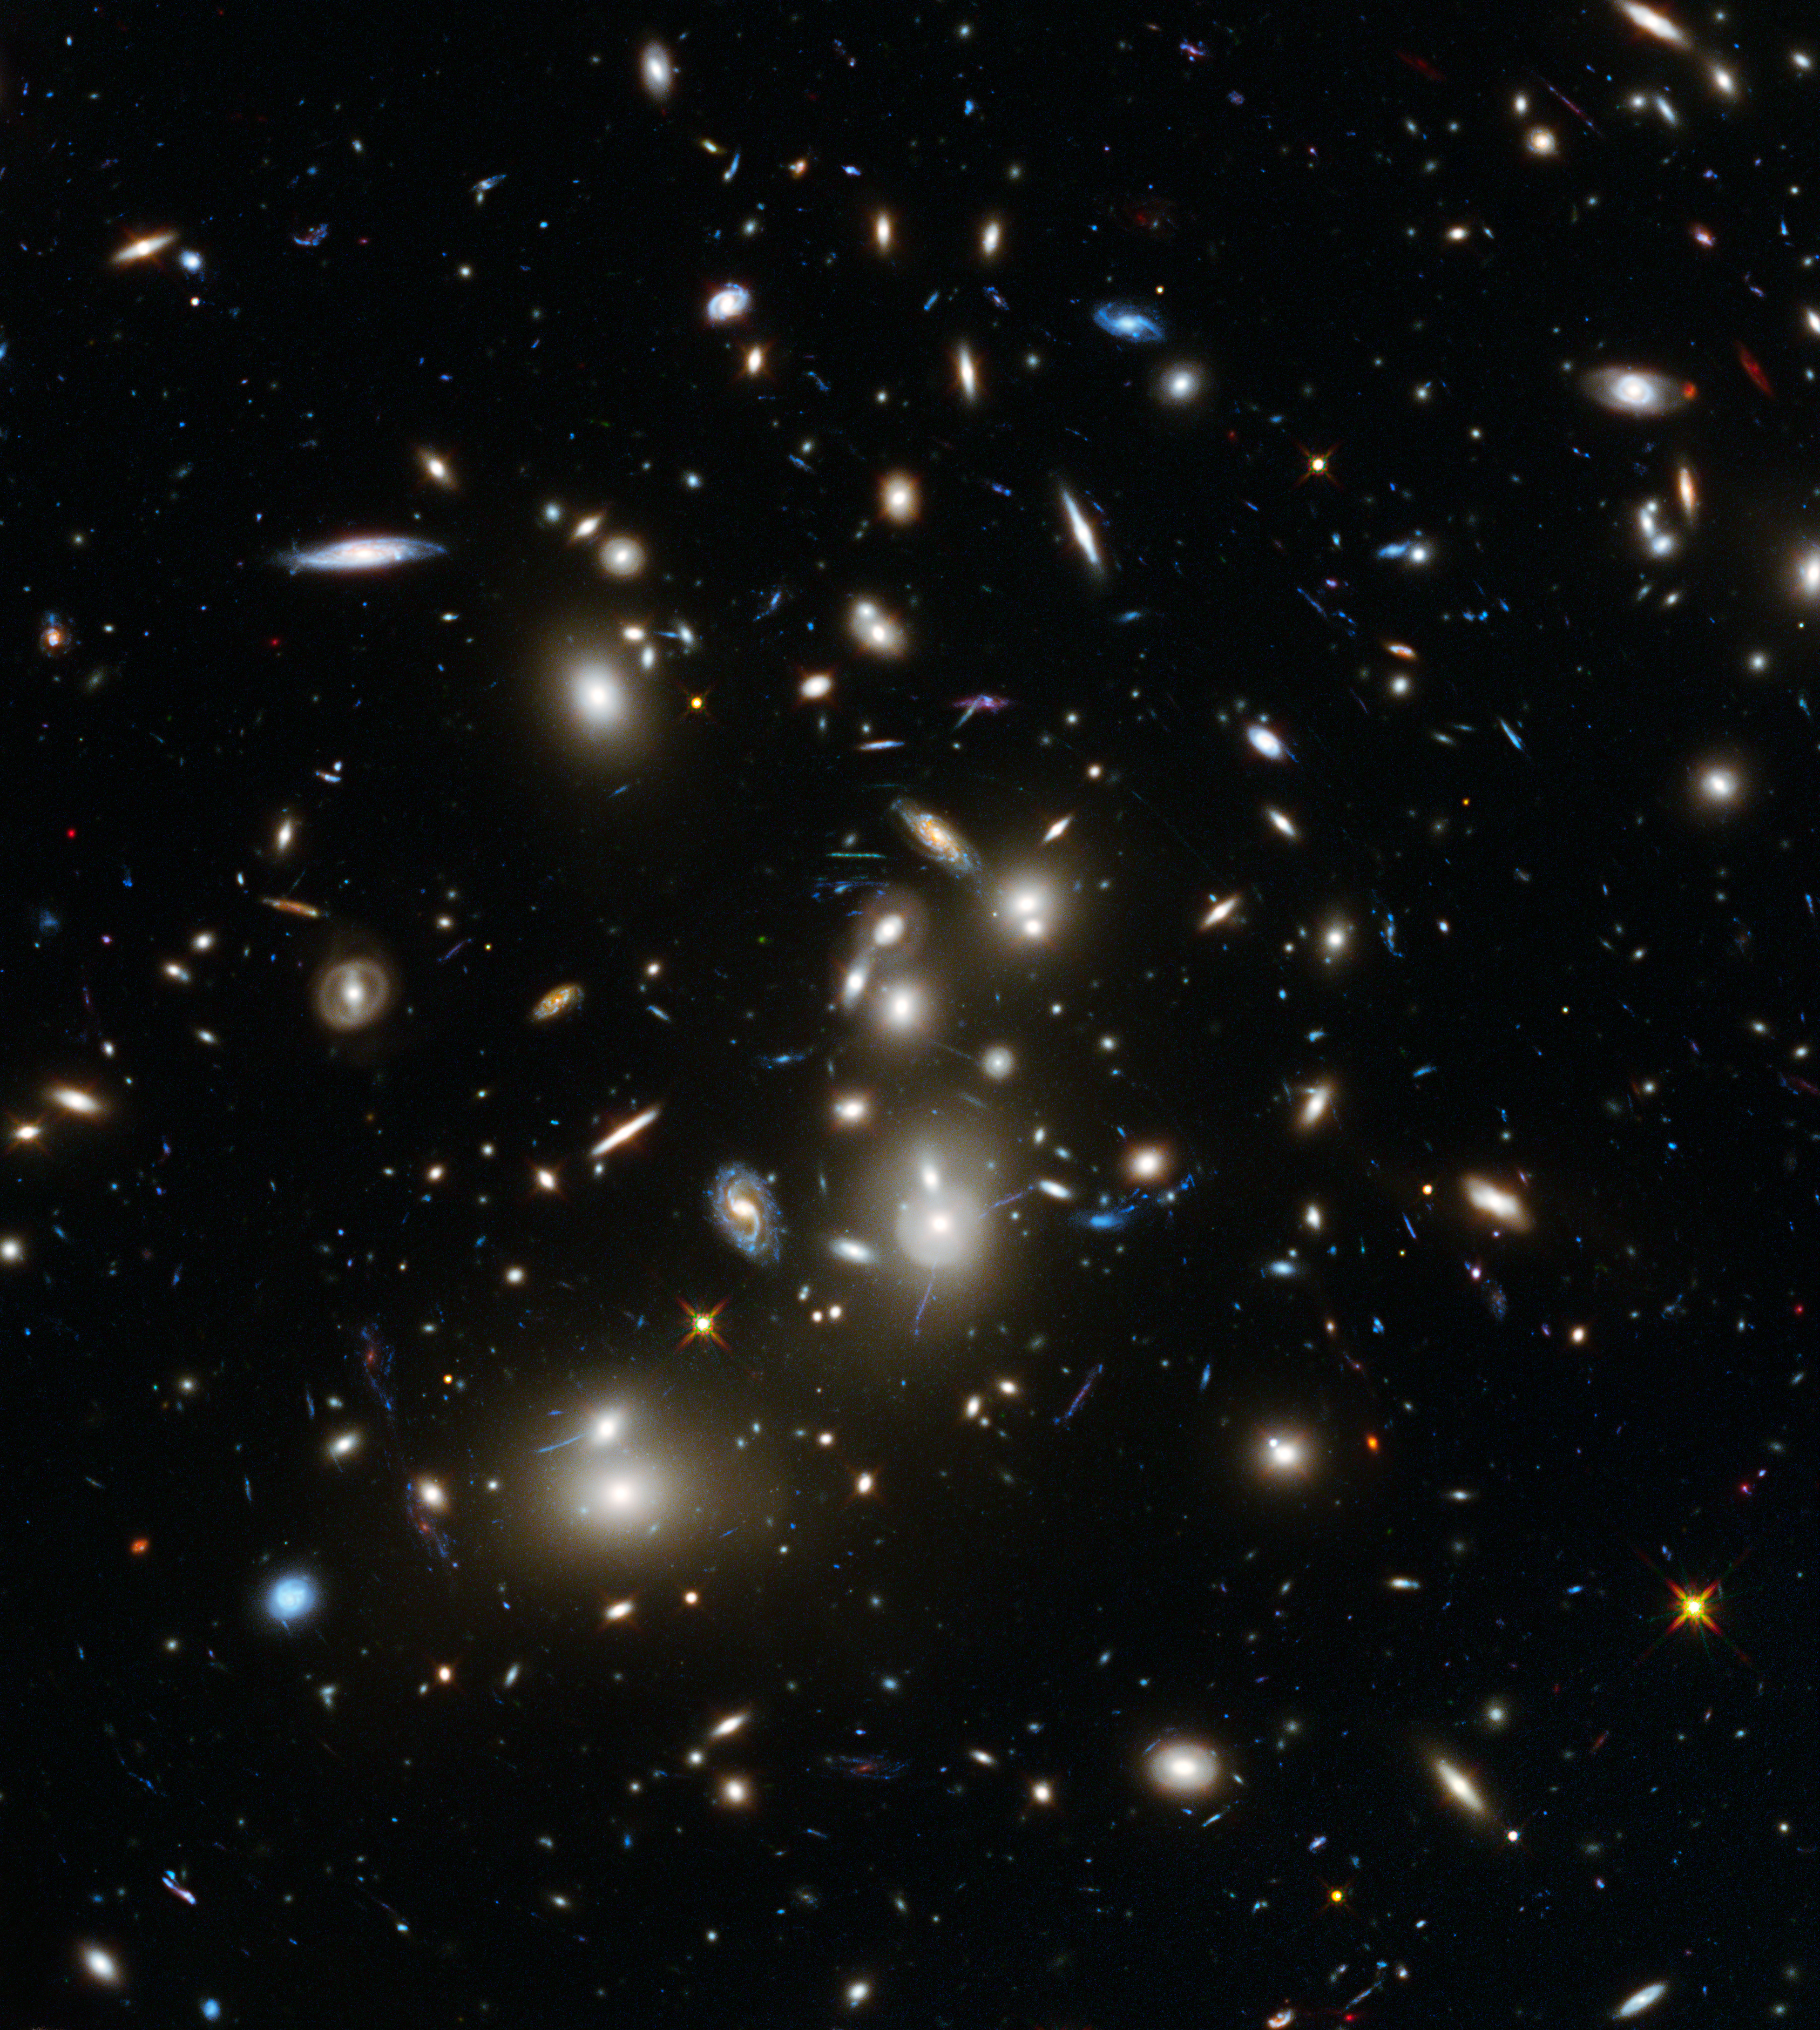 Galaxy cluster. Photo from Wikipedia